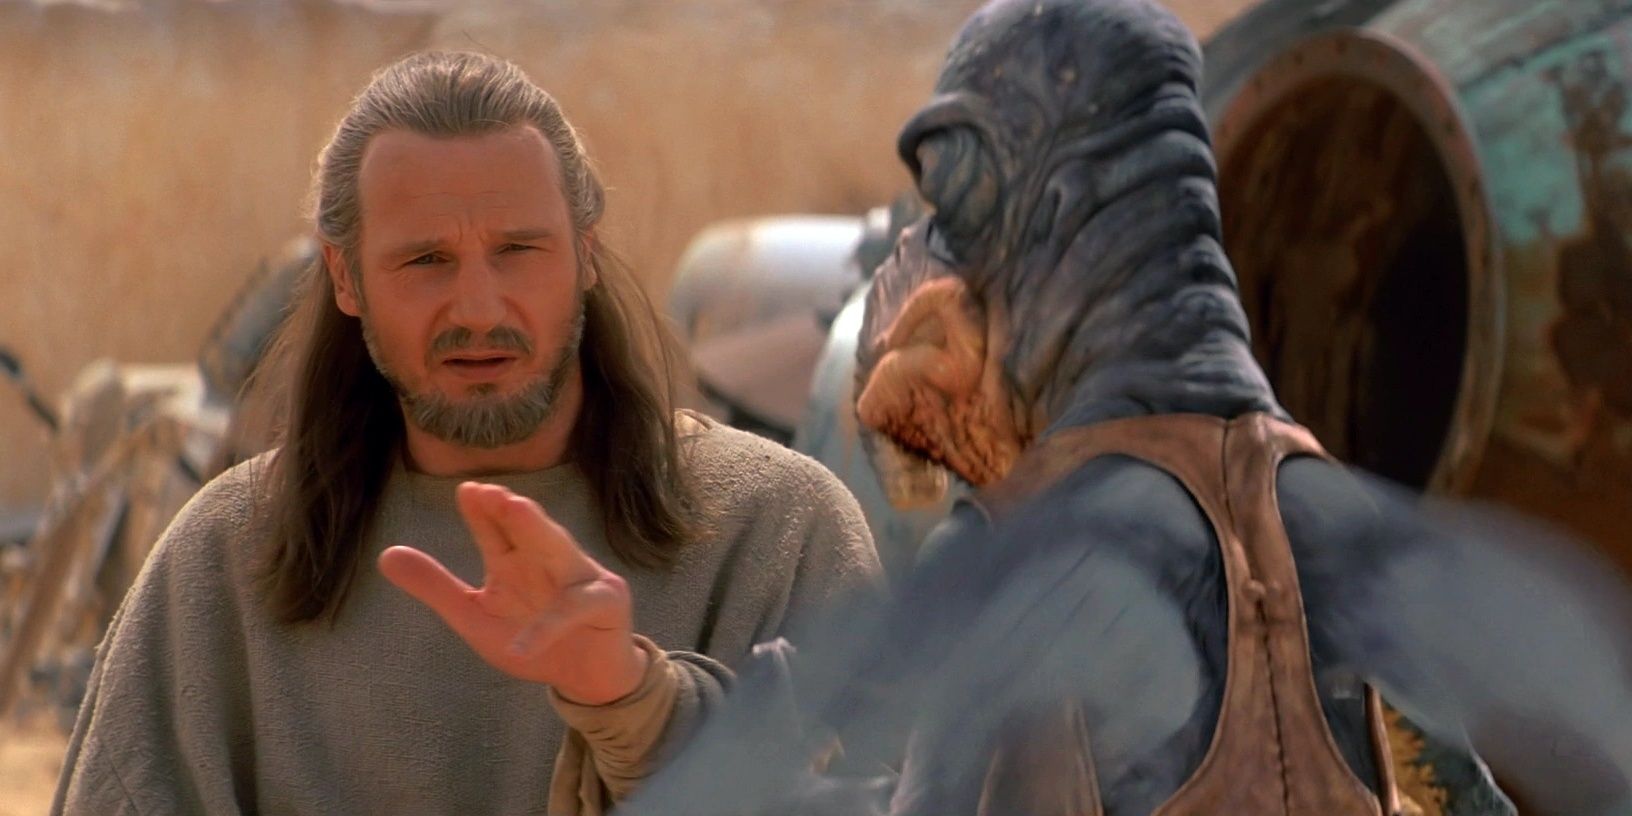 Qui-Gon tries to use the Force on Watto